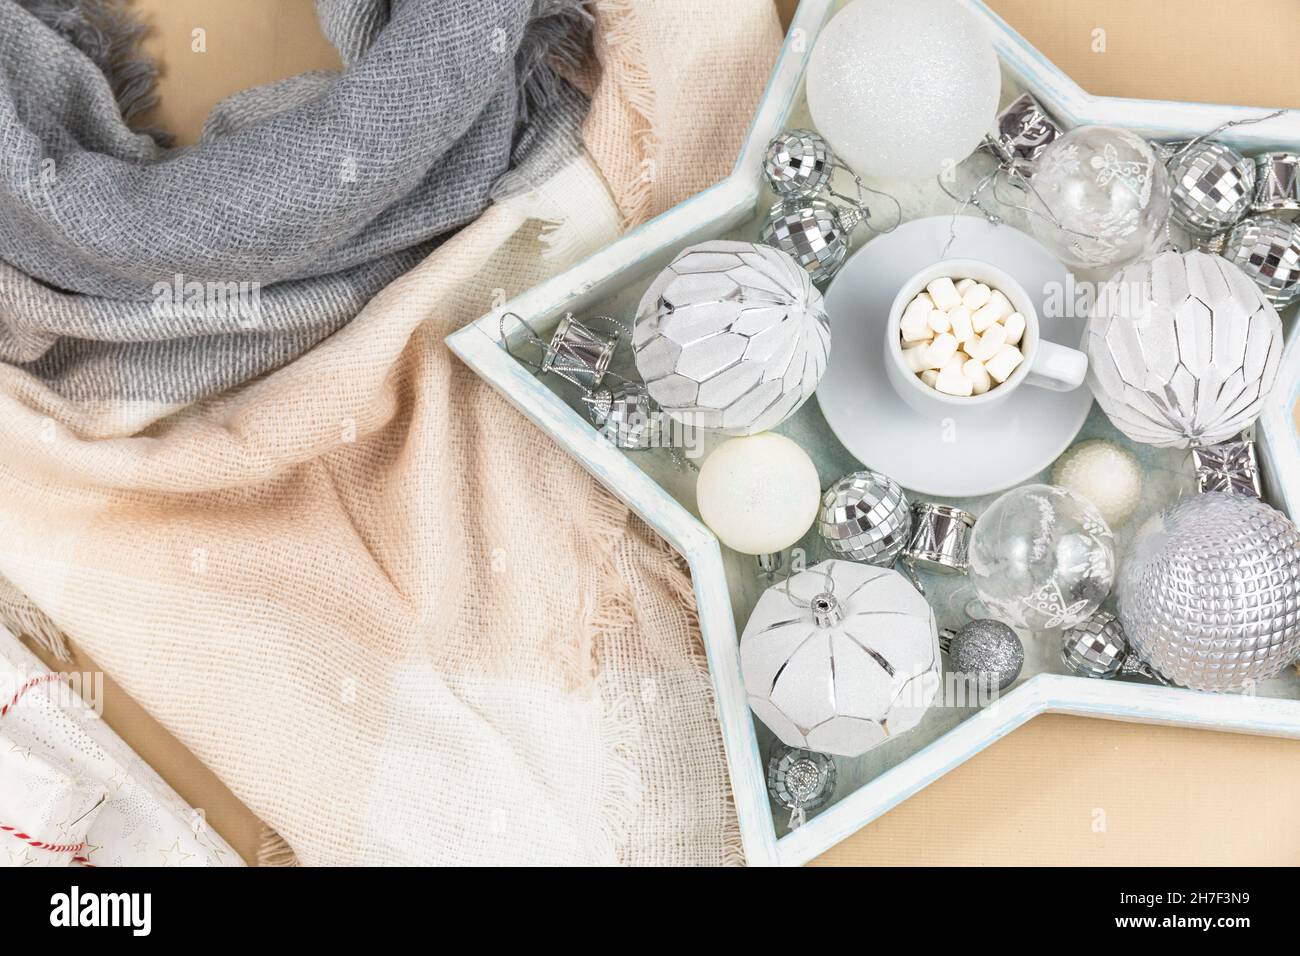 A cup of coffee with marshmallows on white tray and garlands, led lights. Christmas still life Stock Photo